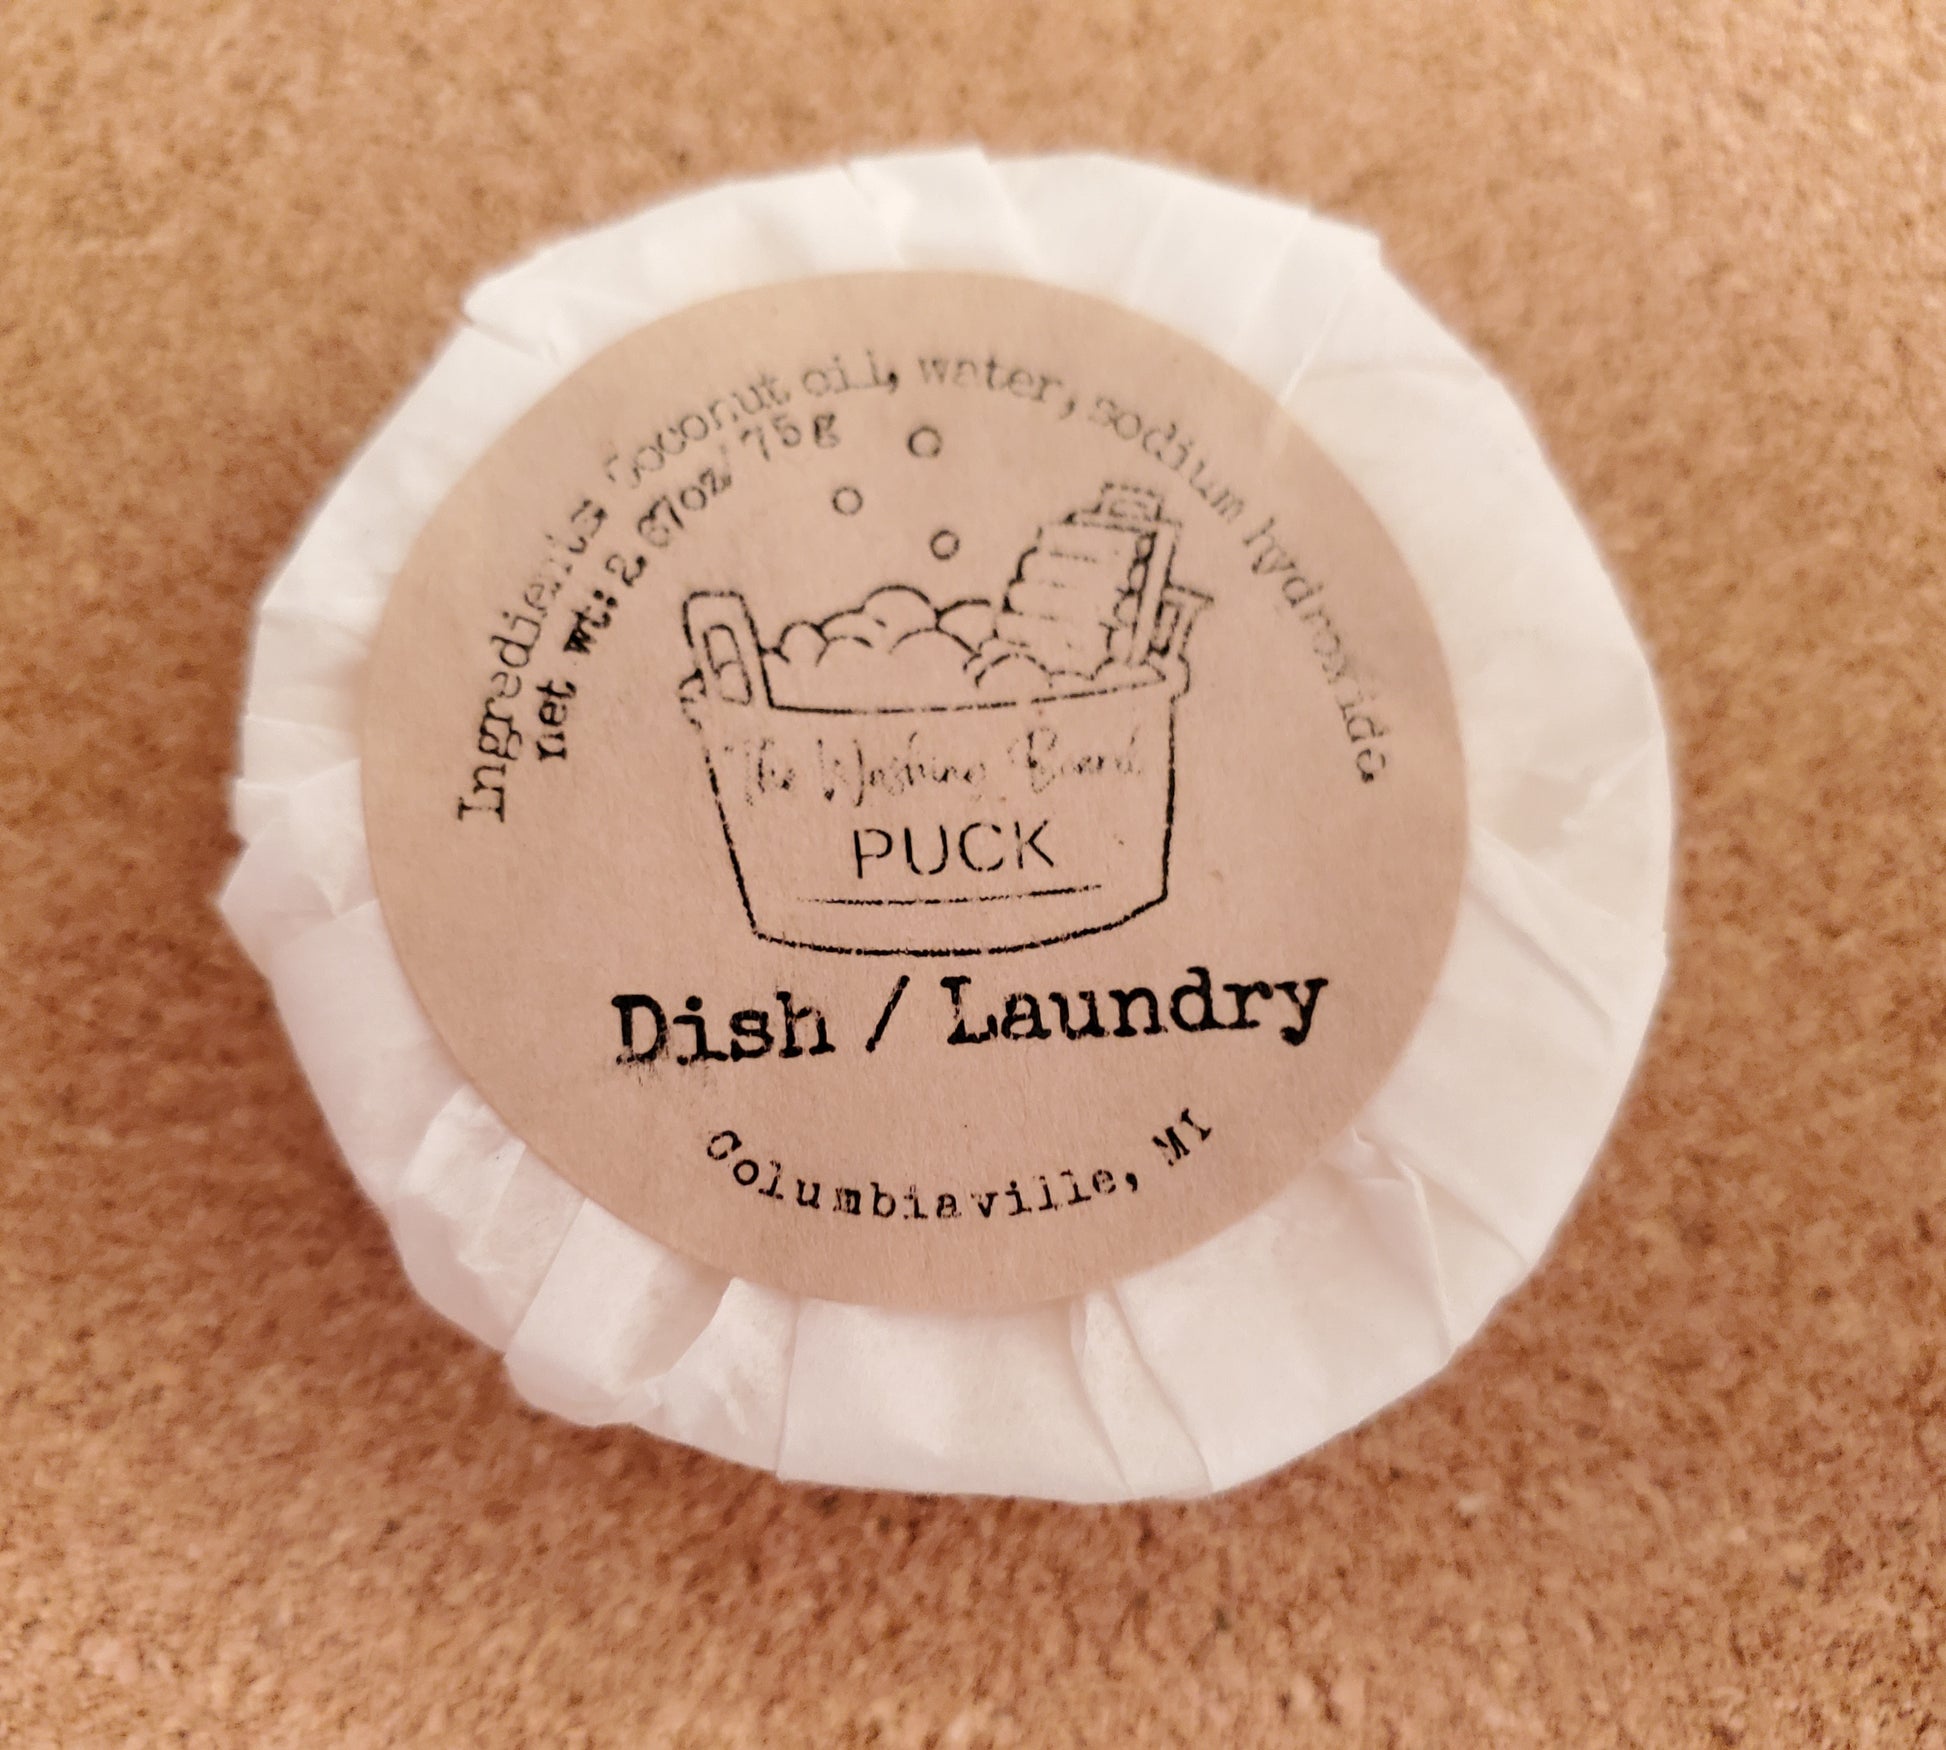 Dish and Laundry Puck